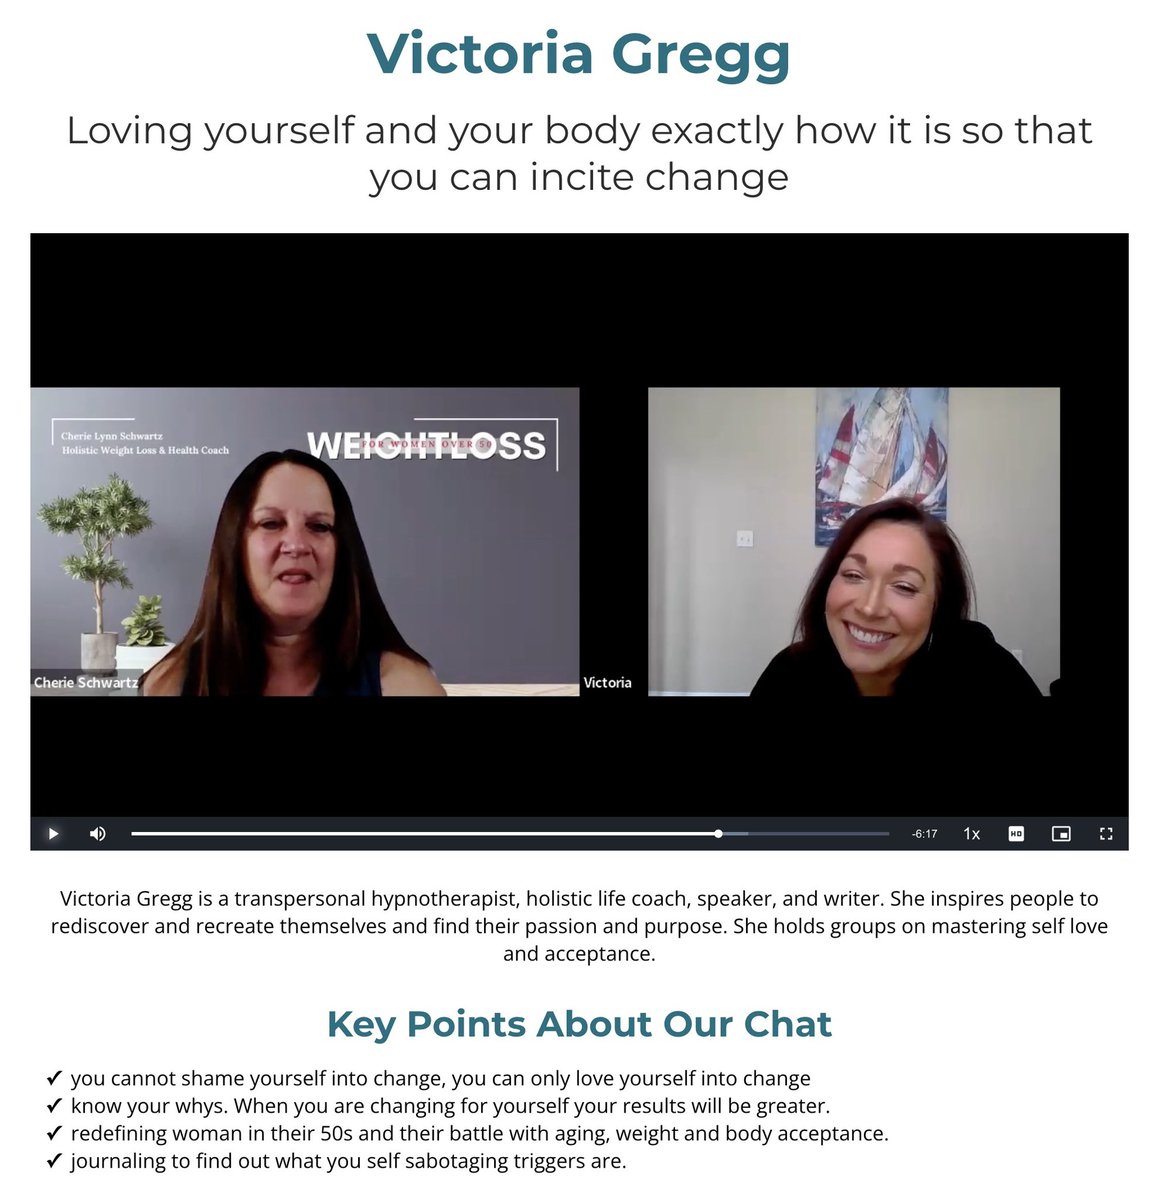 I was honored to be part of this online summit! Hopefully my tools and meditation can help people. Check out the meditation for weight loss and self-love here. linktr.ee/victoriagregg #weightloss #weightlosstips